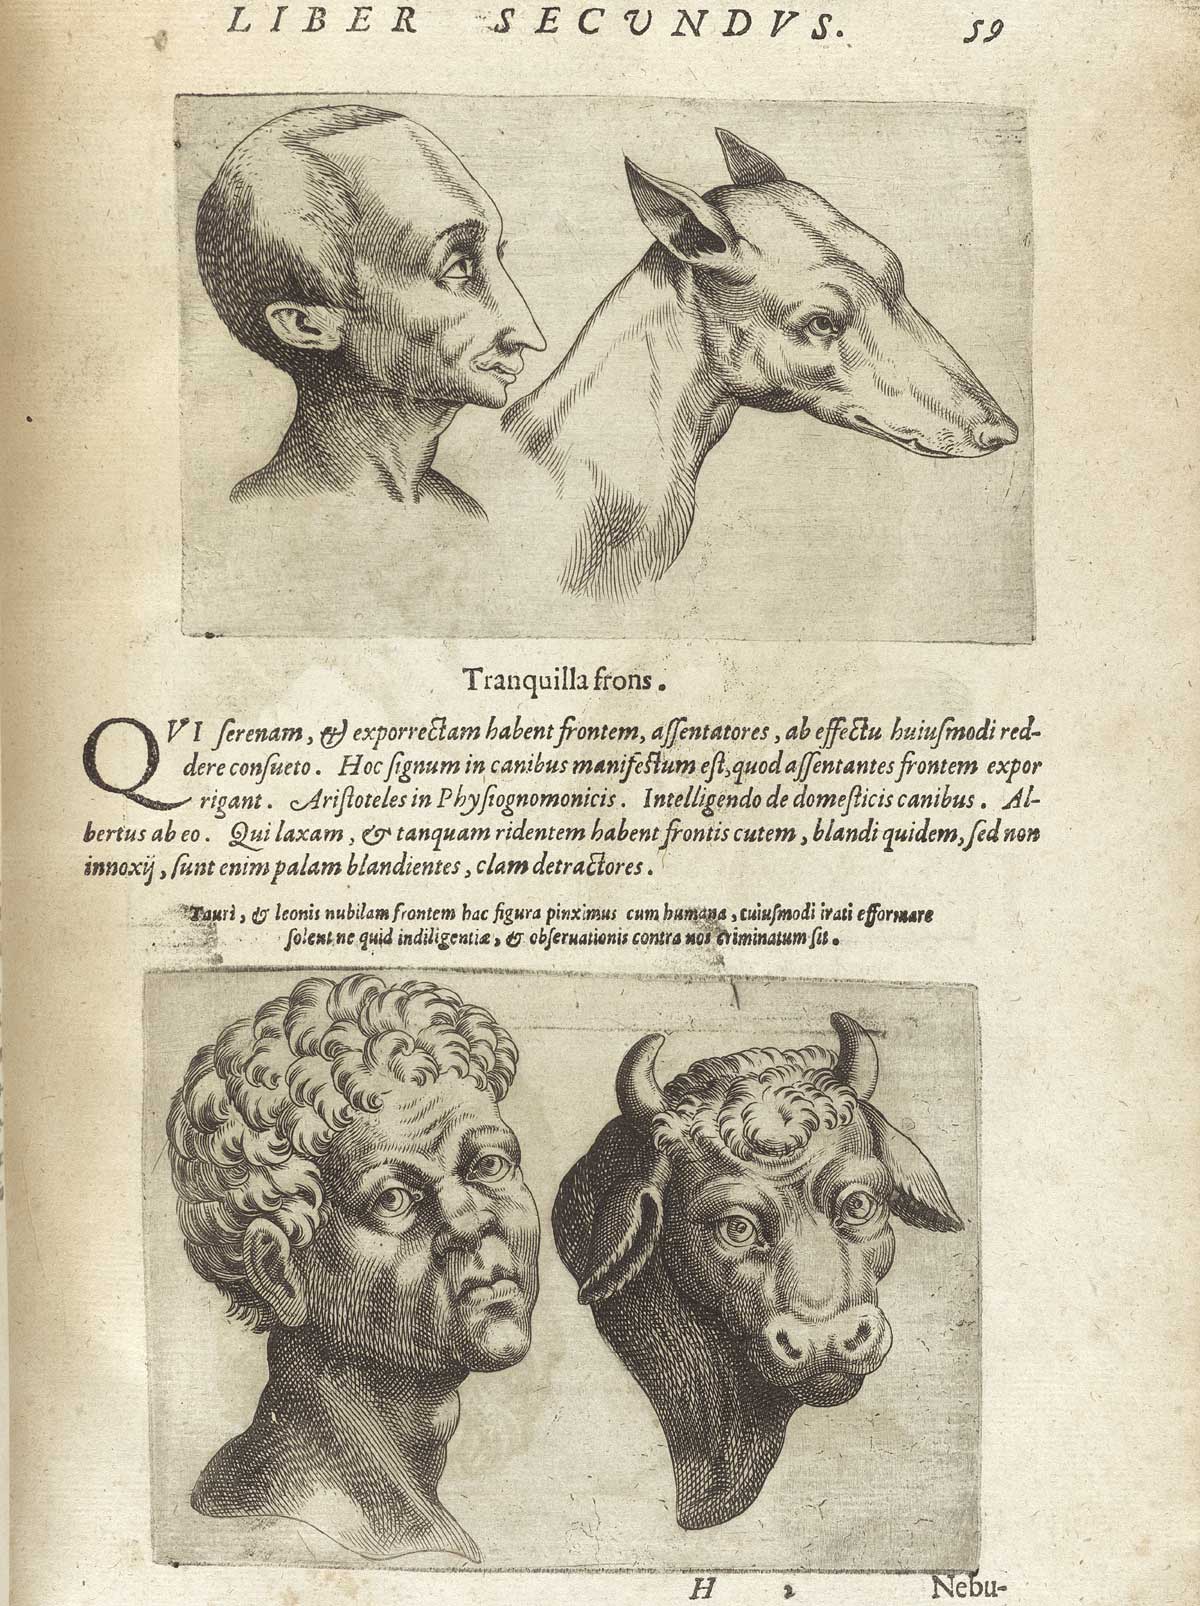 An upper and lower image. In the top image has the head and shoulders right side view of a man with a long nose and forehead and a dog. The bottom image has the head and shoulders front view of man on the left and a bull on the right.